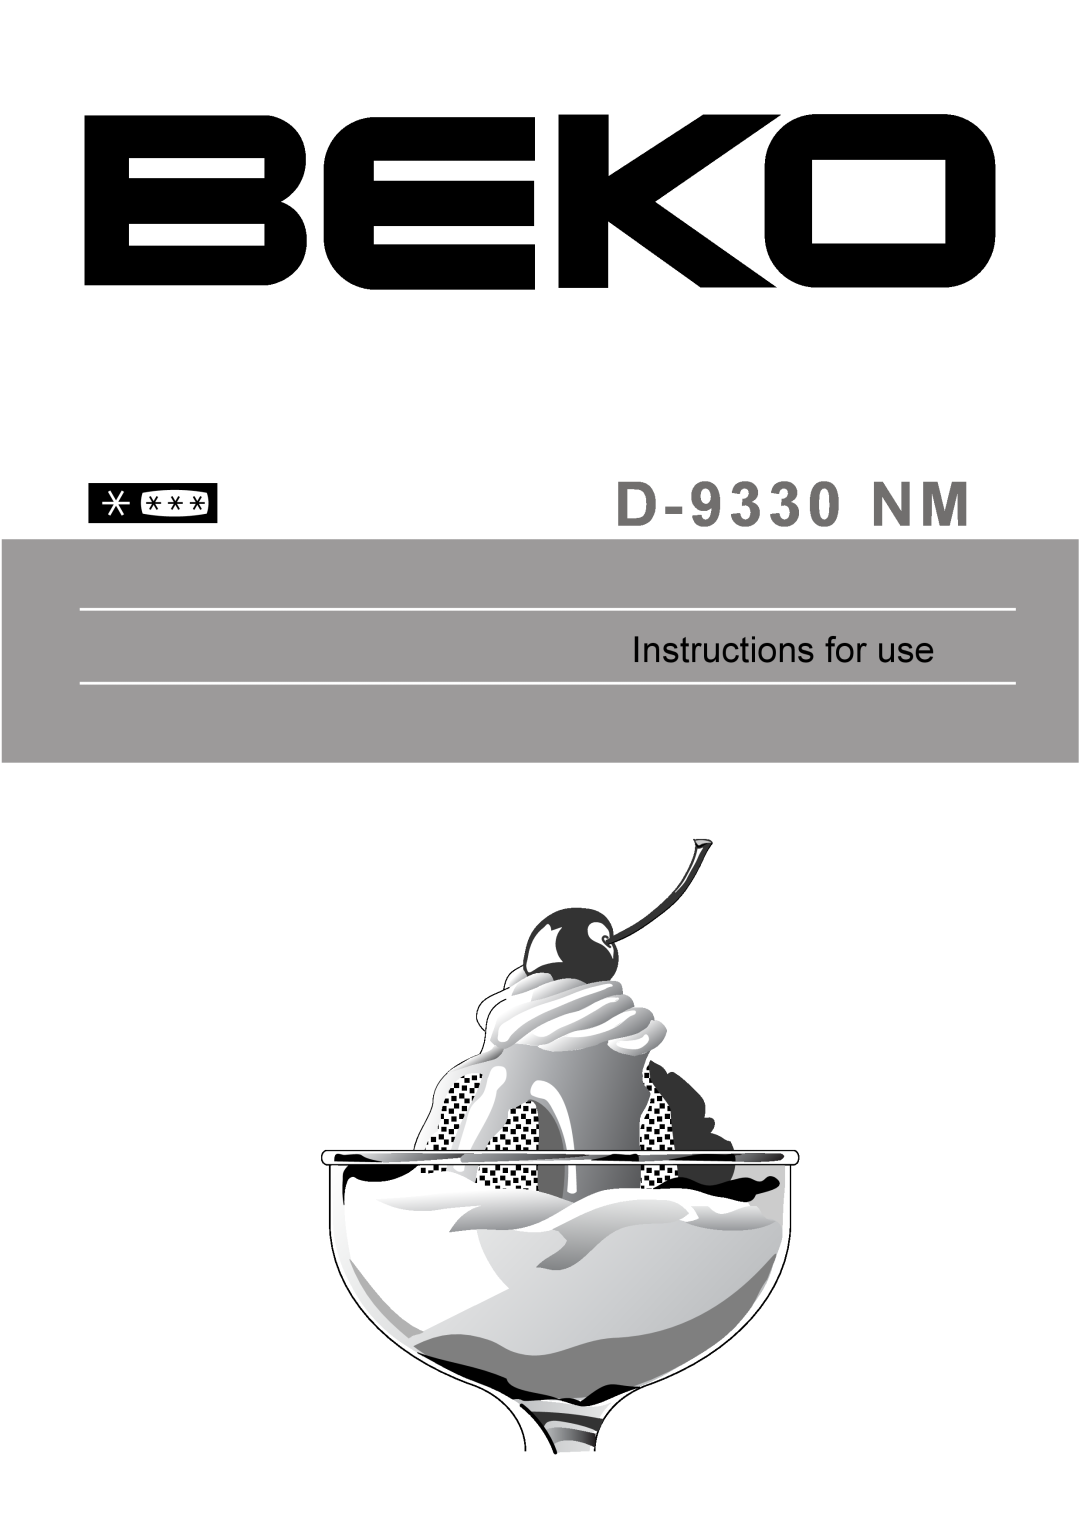 Beko D-9330 NM manual Instructions for use 